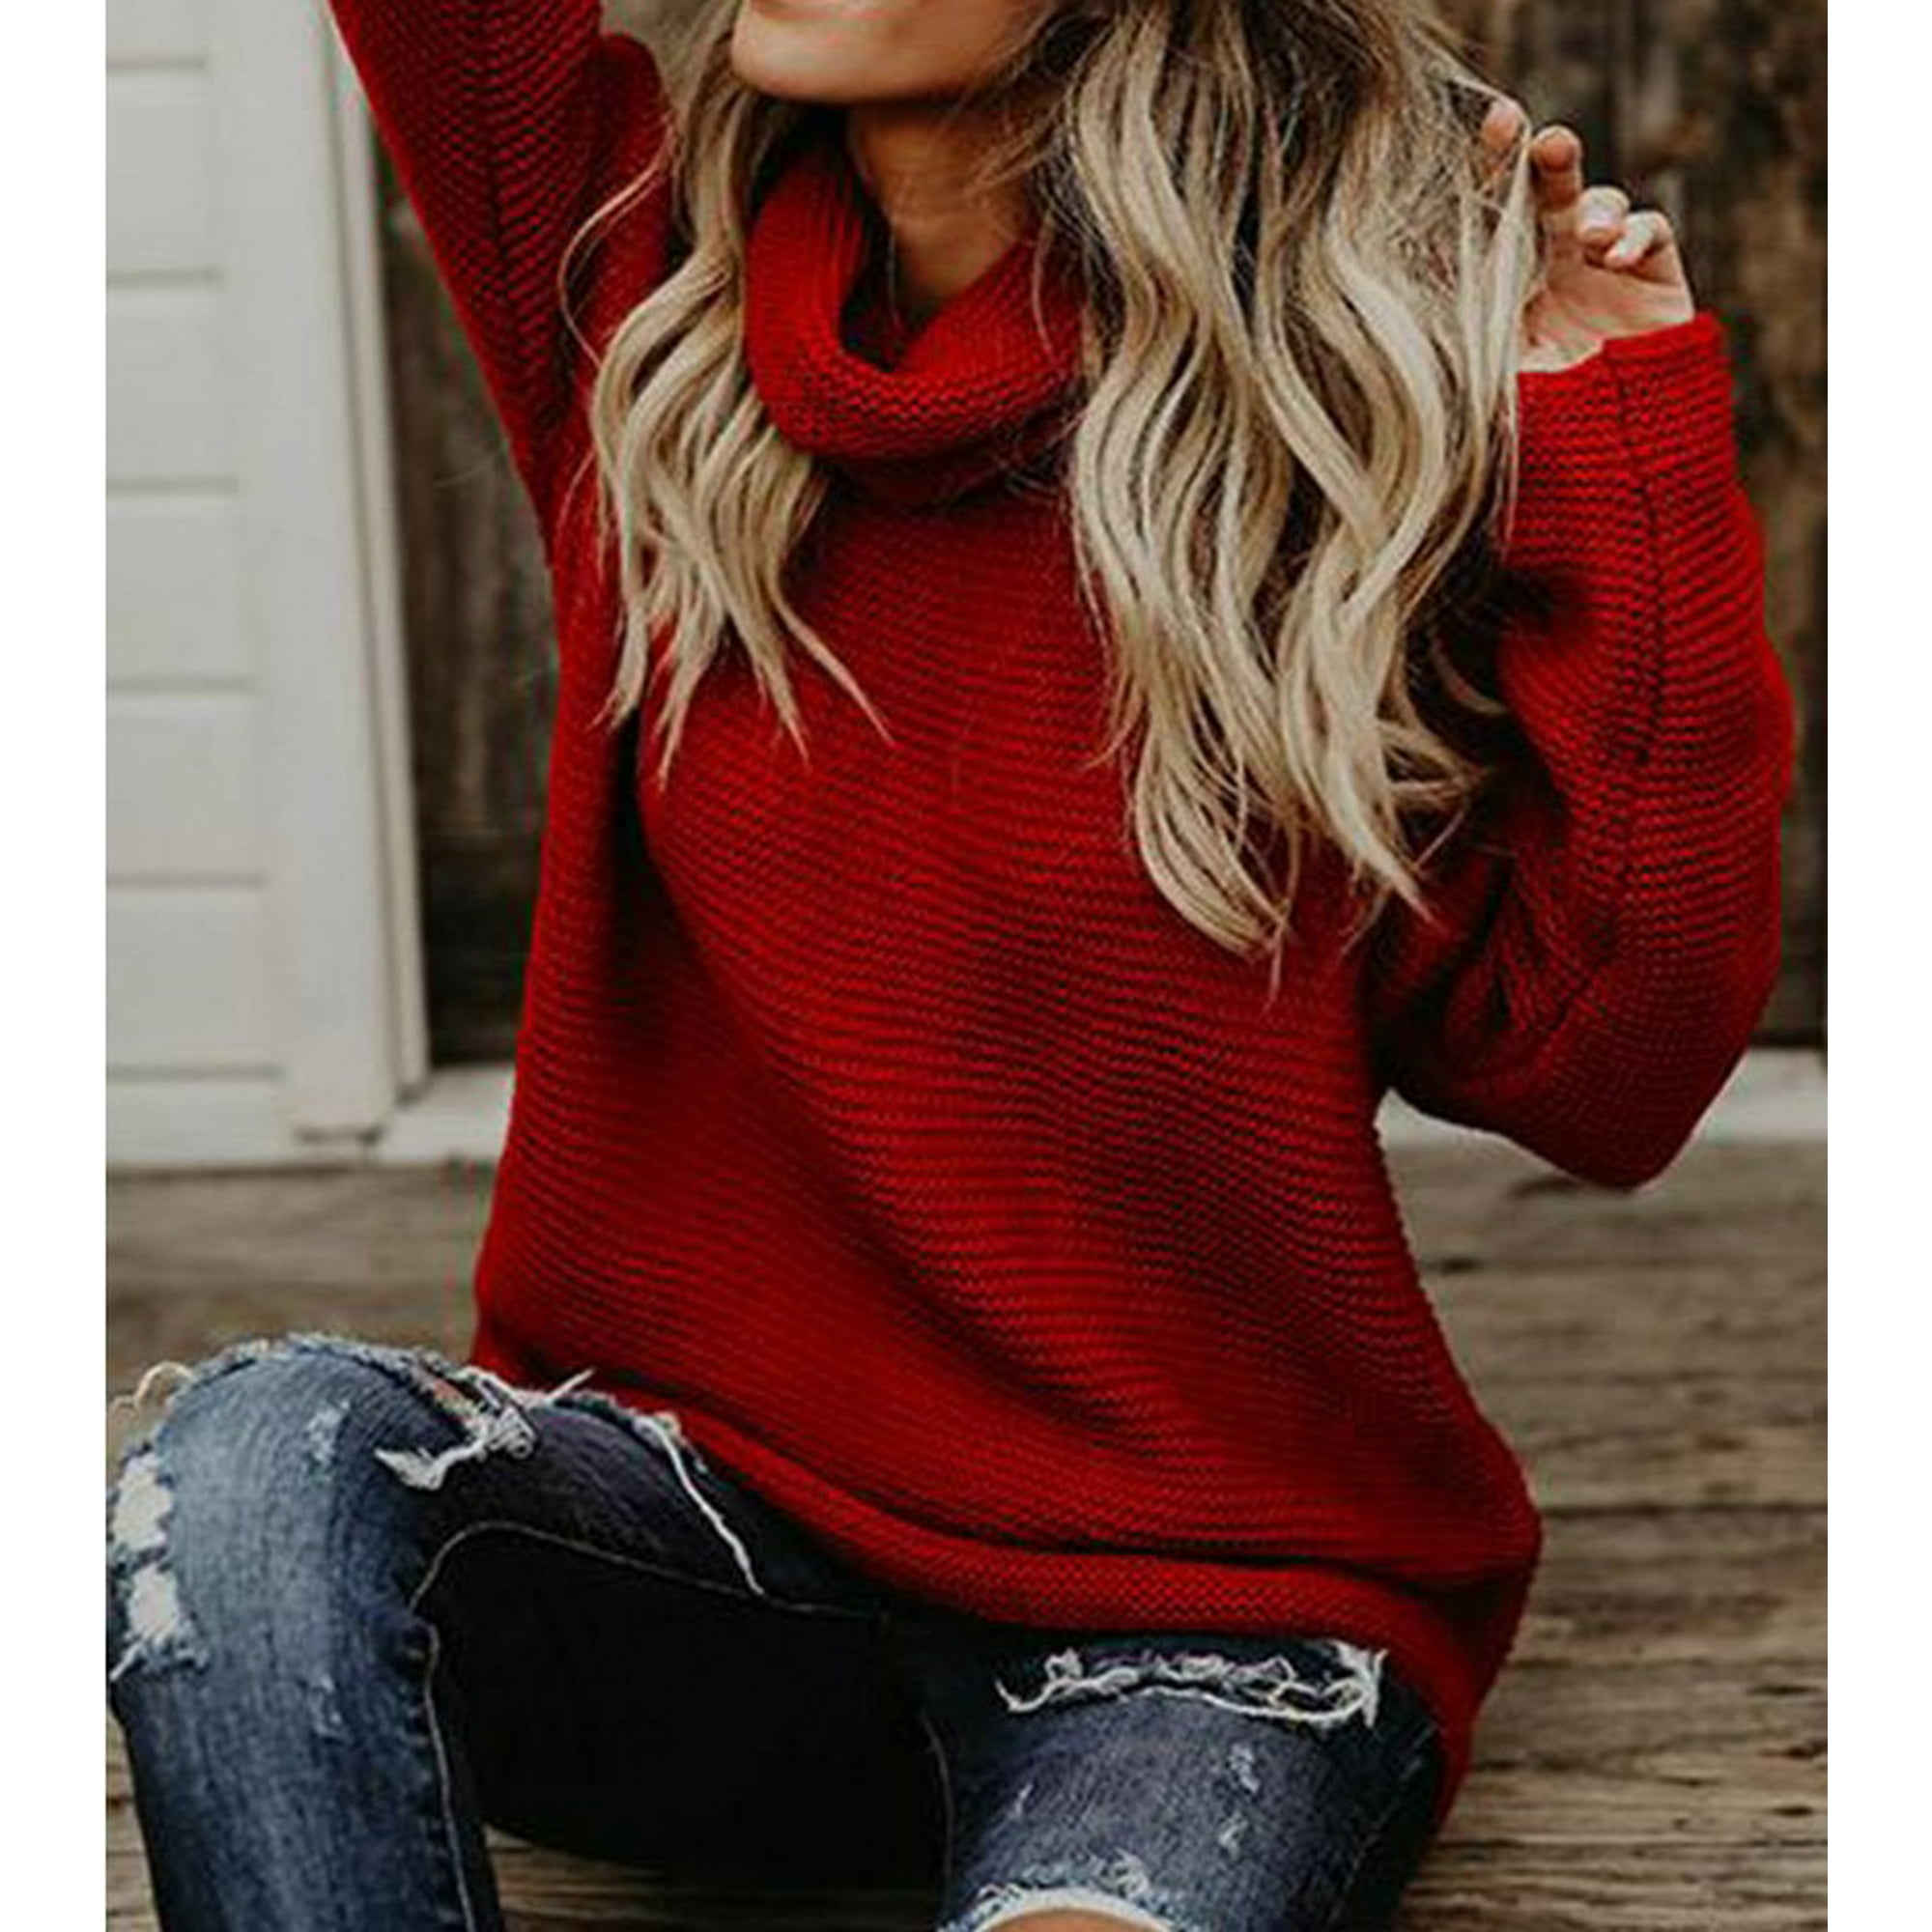 Women's Casualsolid Color Casual Thick Line Long Sleeve Turtleneck 